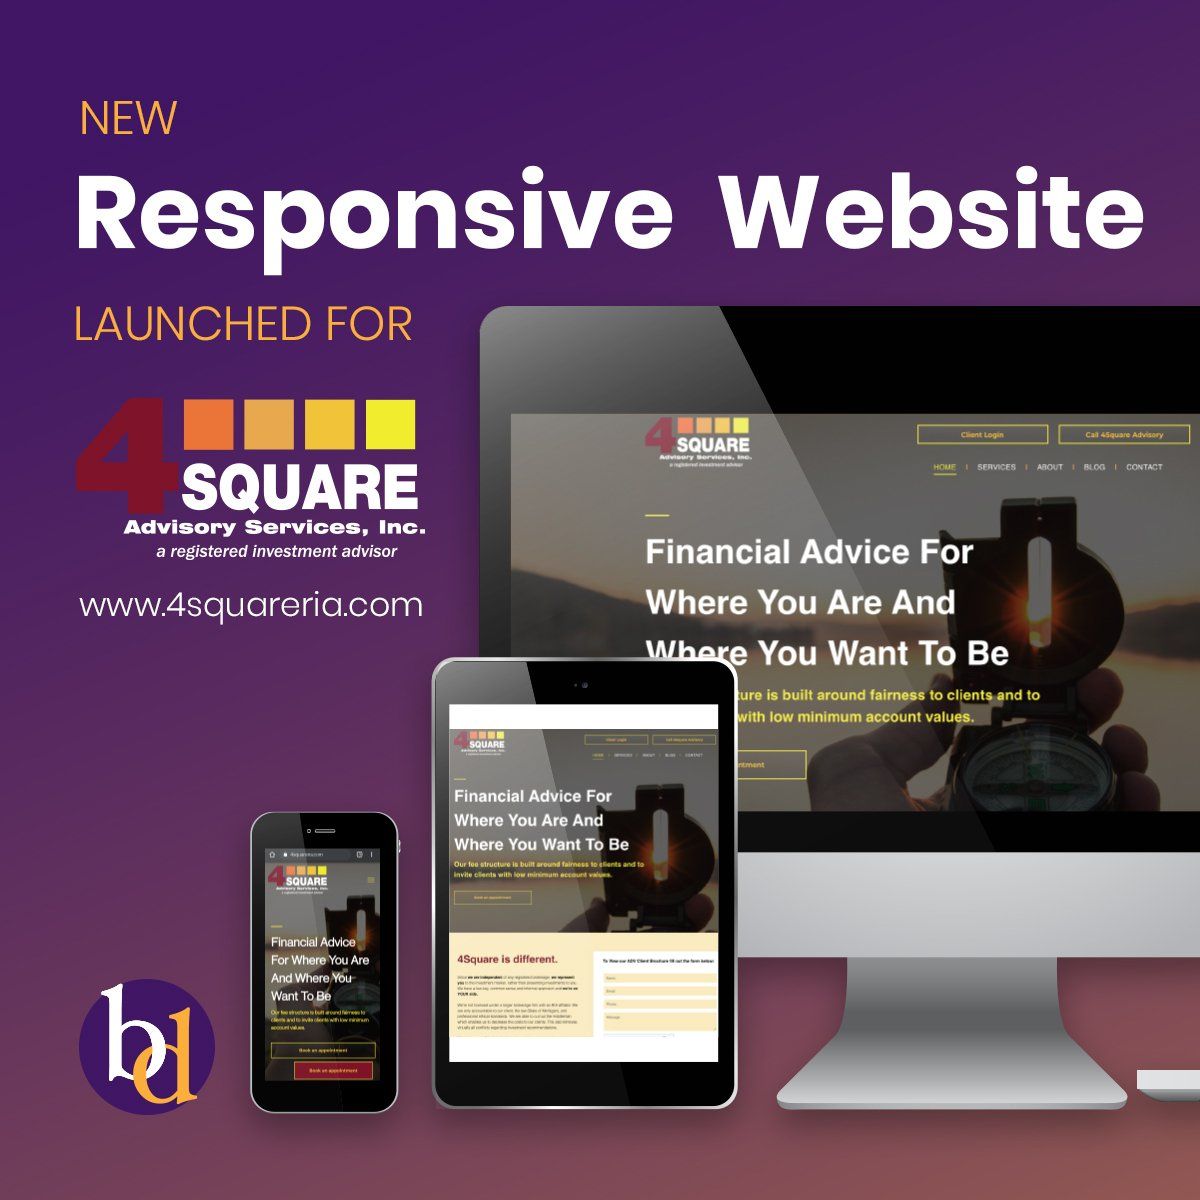 NEW RESPONSIVE WEBSITE launched for 4square Advisory Services